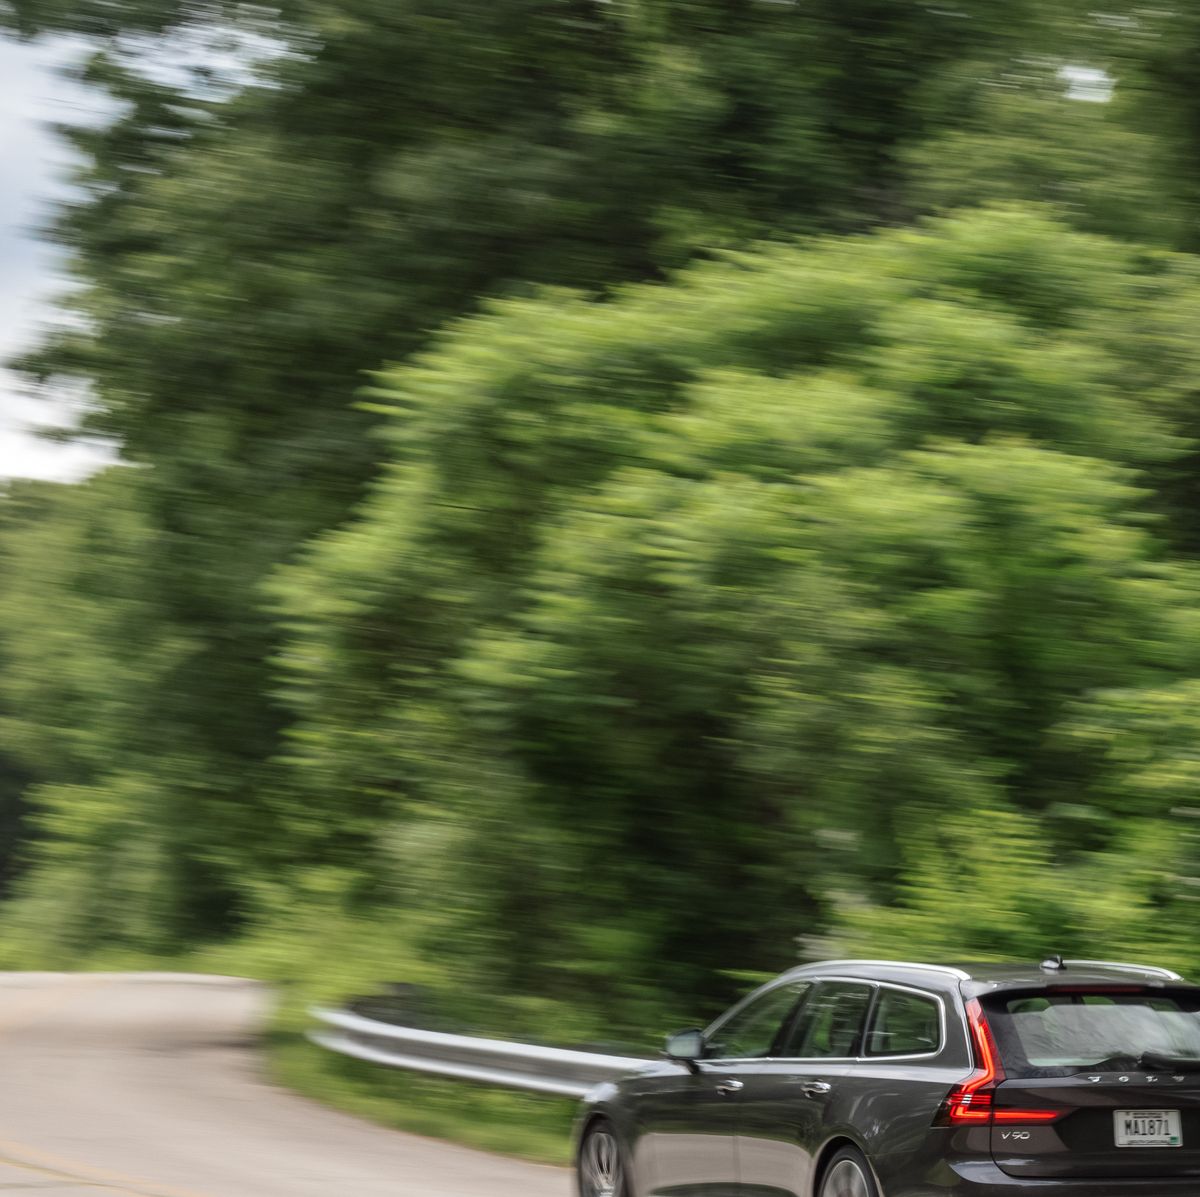 Tested: 2021 Volvo V90 T6 Was Good While It Lasted